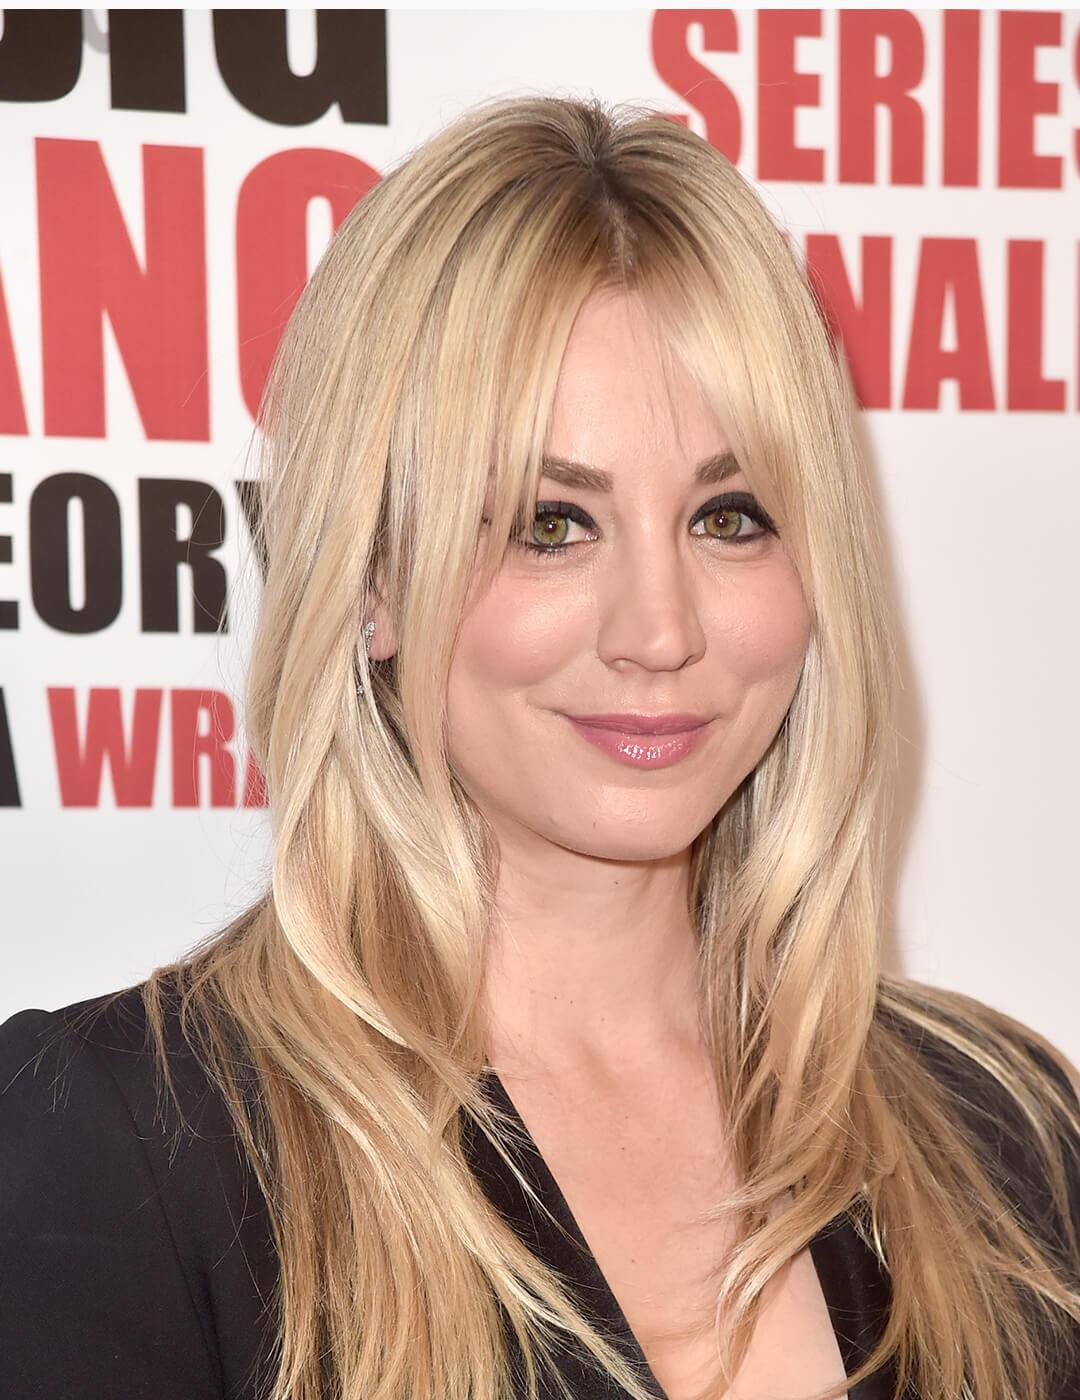 Kaley Cuoco looking chic at the red carpet with a wavy hairstyle